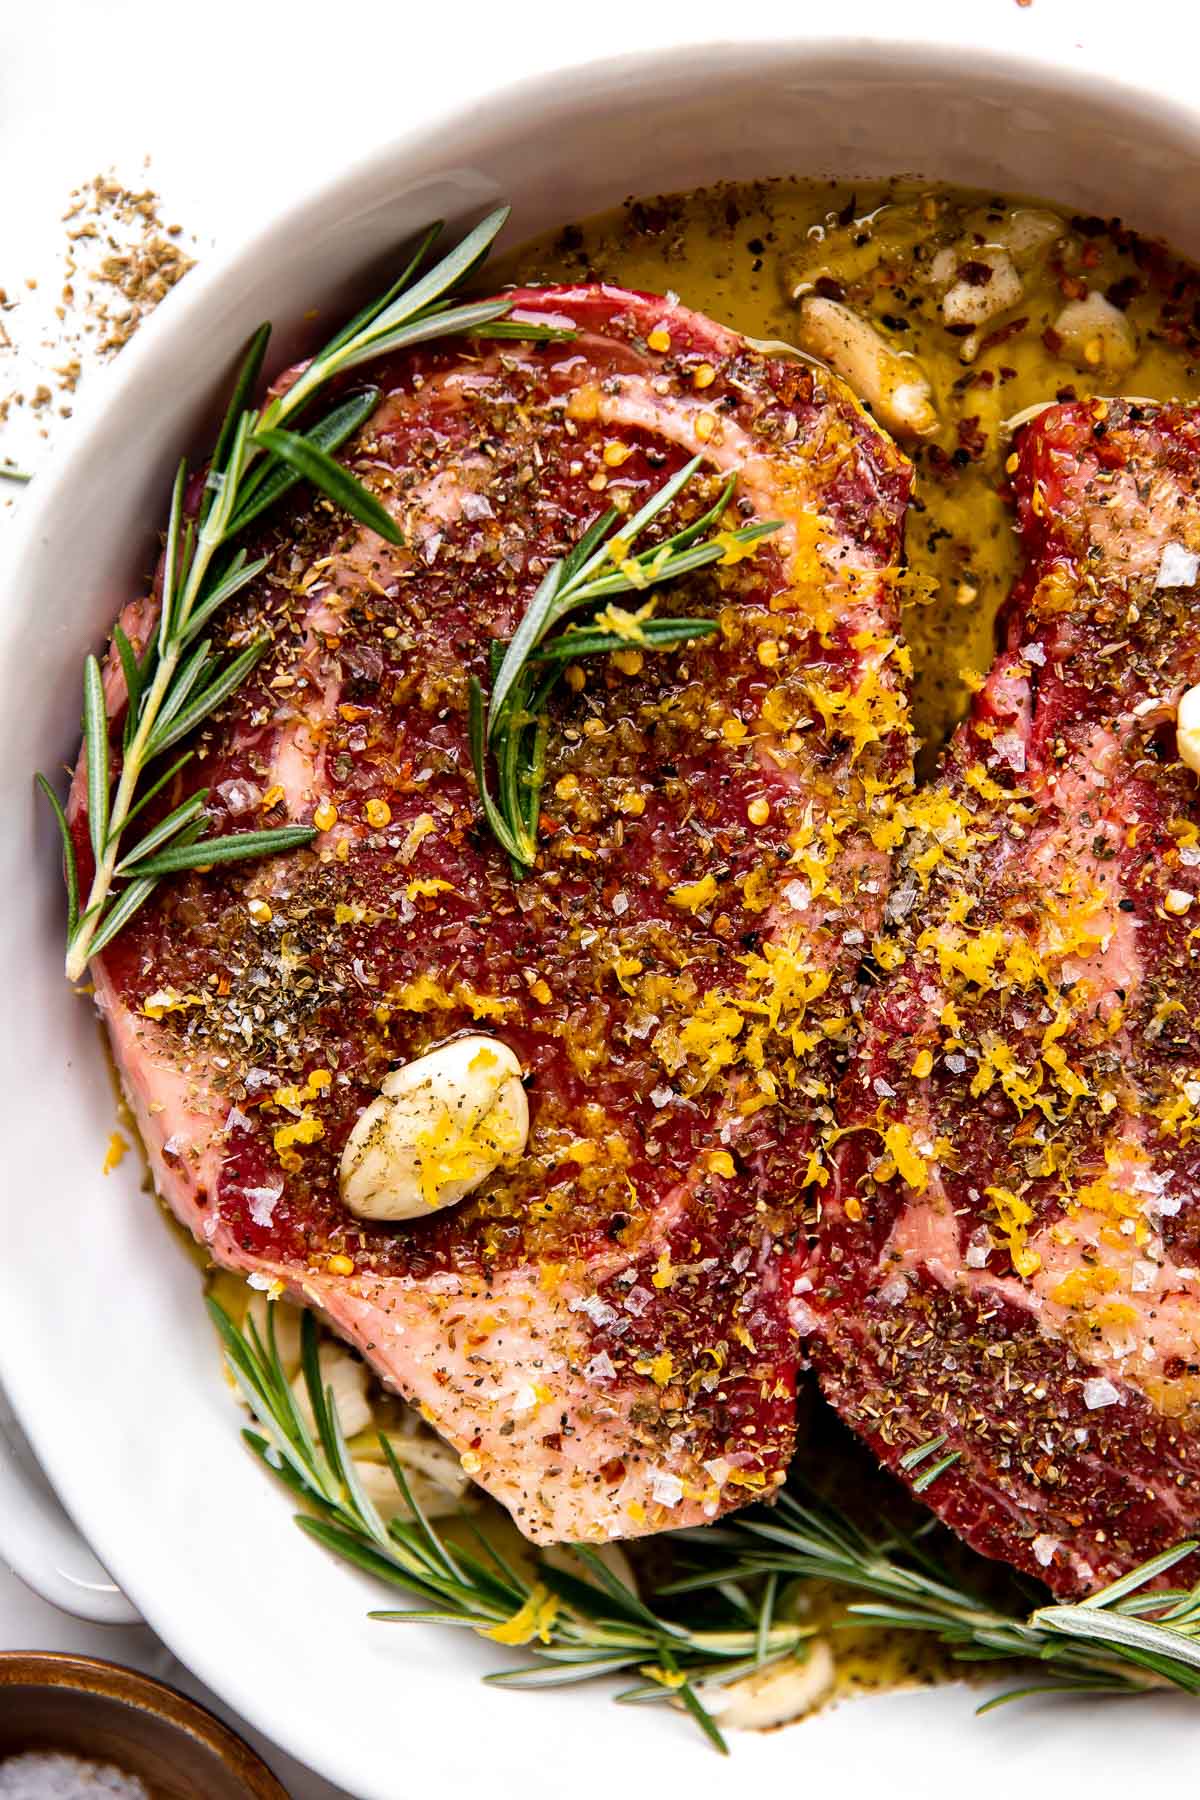 A close up shot of how to make Tuscan style steak: two steaks marinate in a Tuscan-style marinade made with olive oil, lemon zest, garlic, fresh rosemary, dried oregano, and crushed red pepper flakes. The steaks marinate inside of a double handle baking dish that sits atop a creamy white textured surface surrounded by a bulb of garlic and three small pinch bowls filled with crushed red pepper flakes, kosher salt, and ground black pepper.